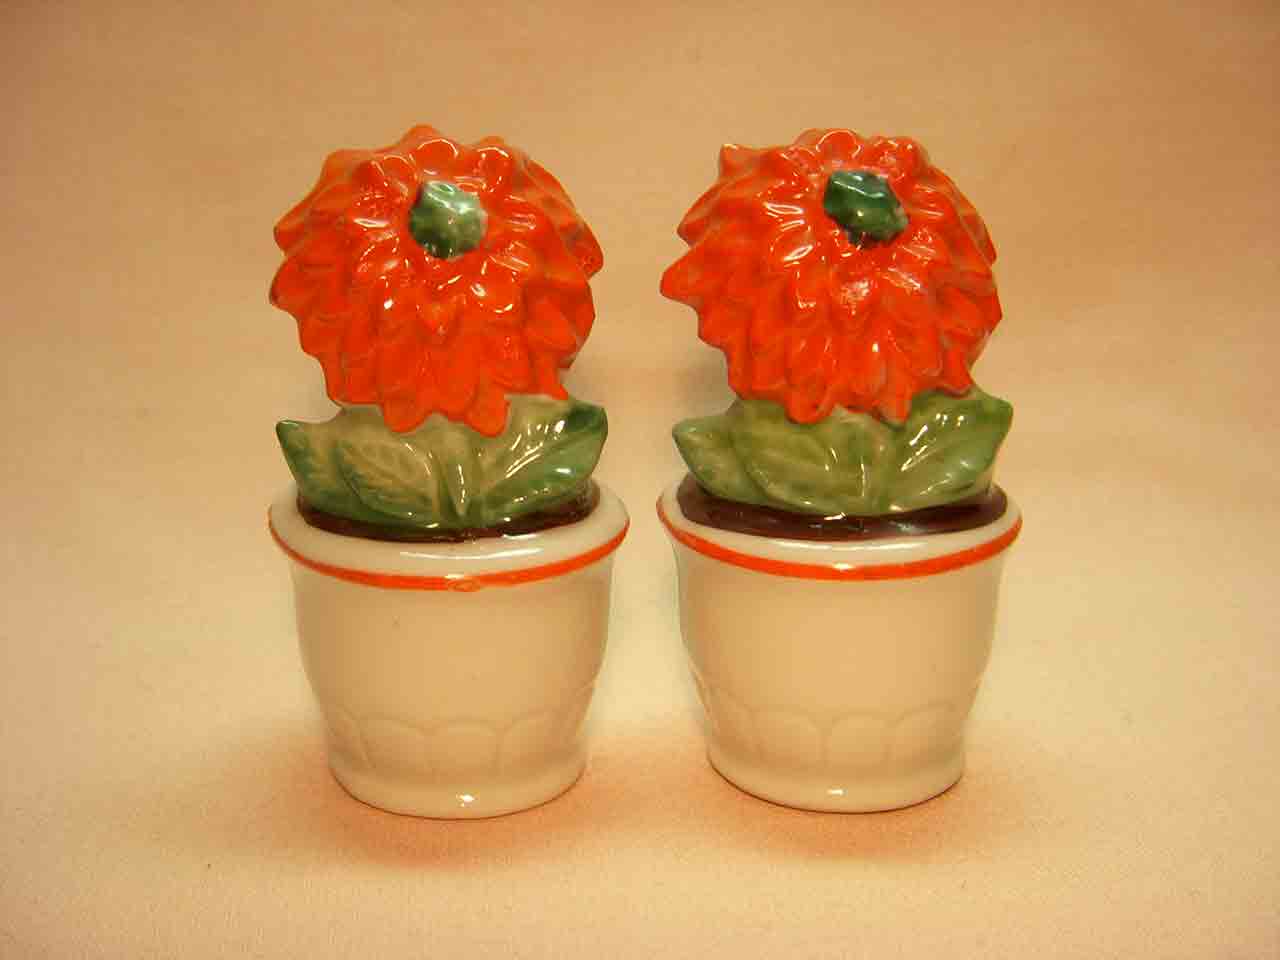 Germany flowers salt and pepper shakers